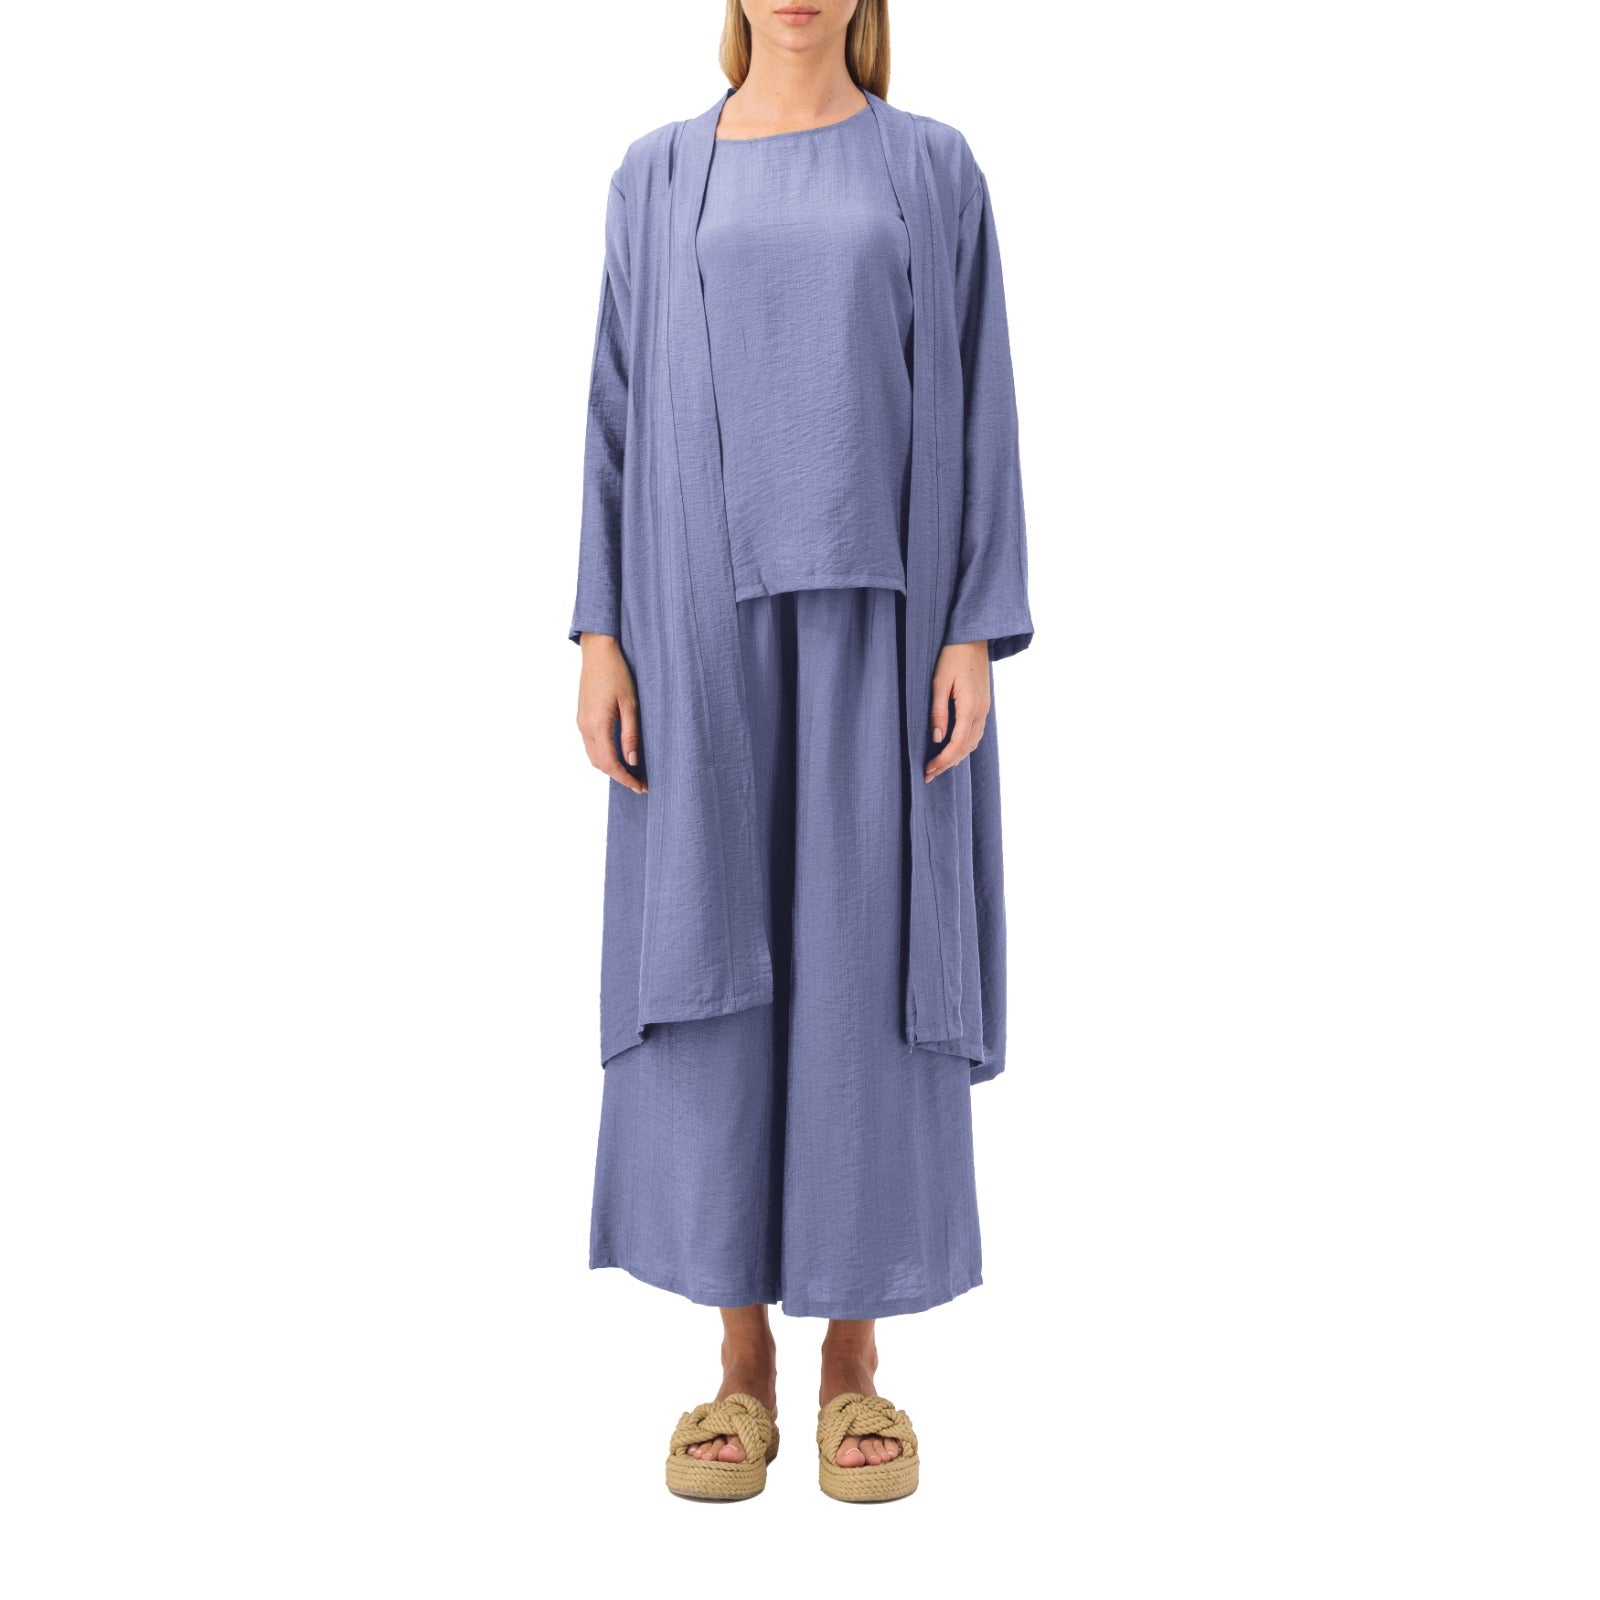 Blue Purple | All Day Closet Set of 3 - Comfortable style in attractive colors -arabian outfit - casual setcasual set - all day outfits - closet fashion store